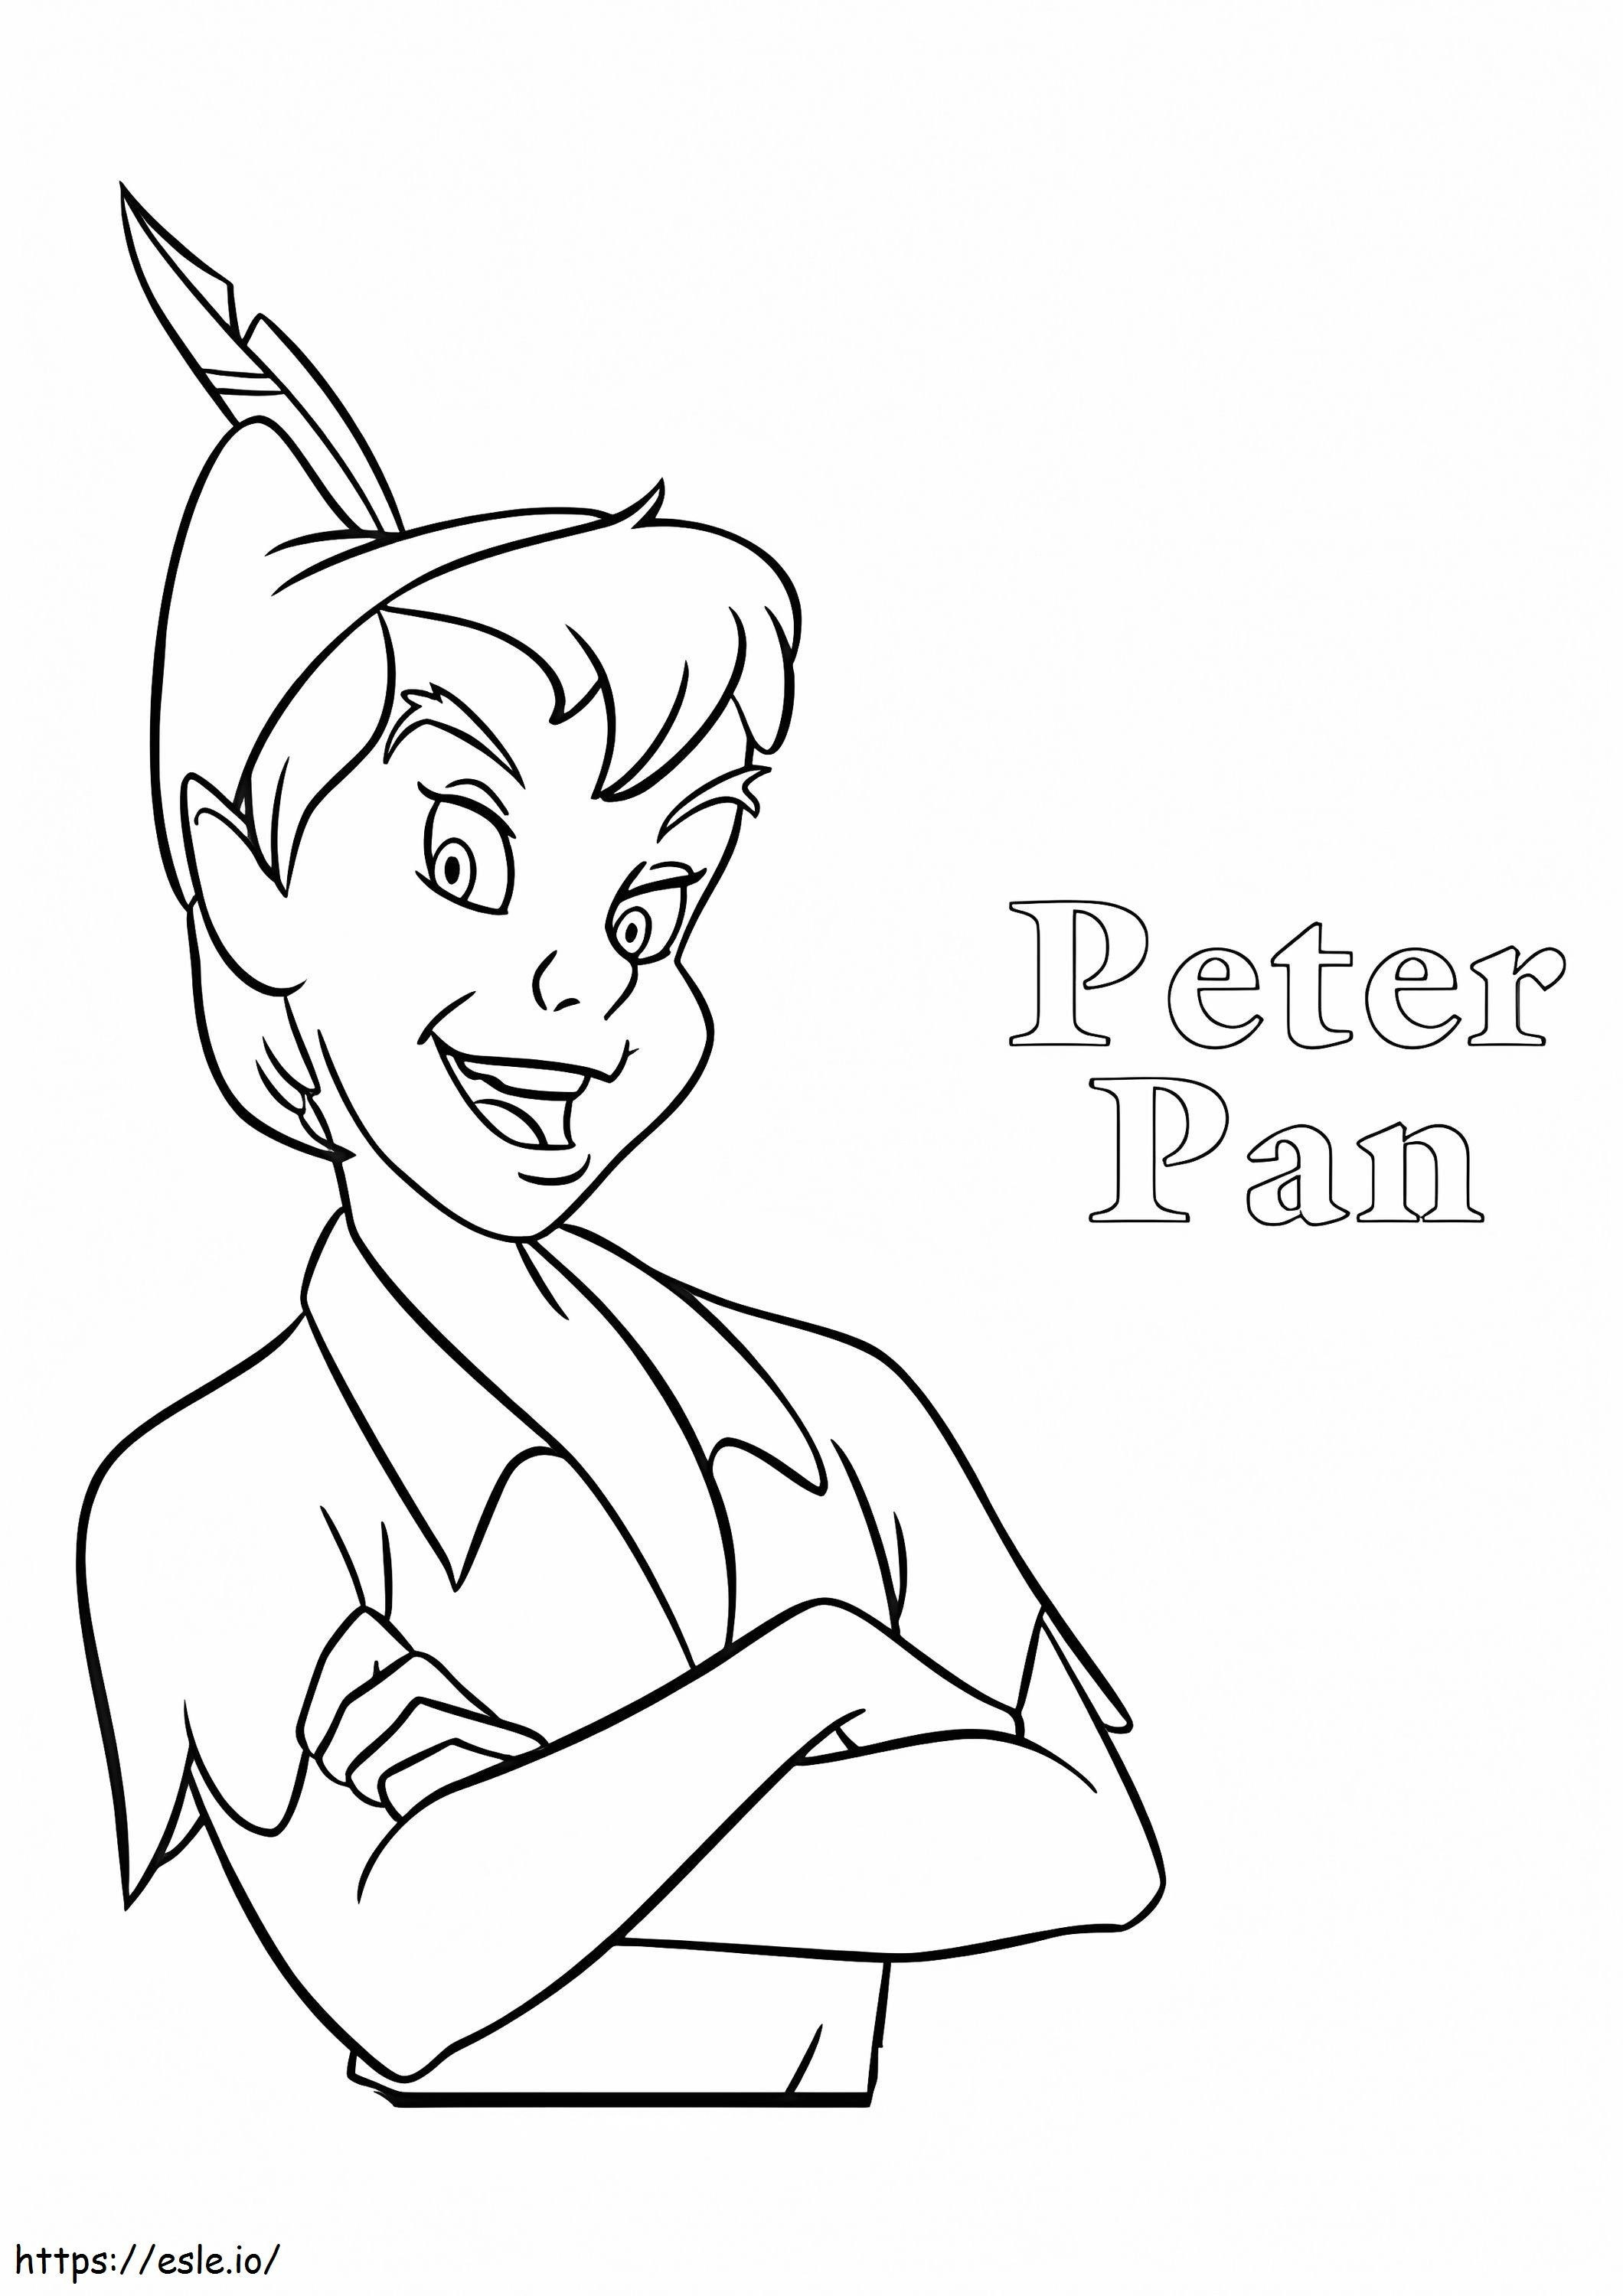 The Peter Pan Close Up A4 coloring page